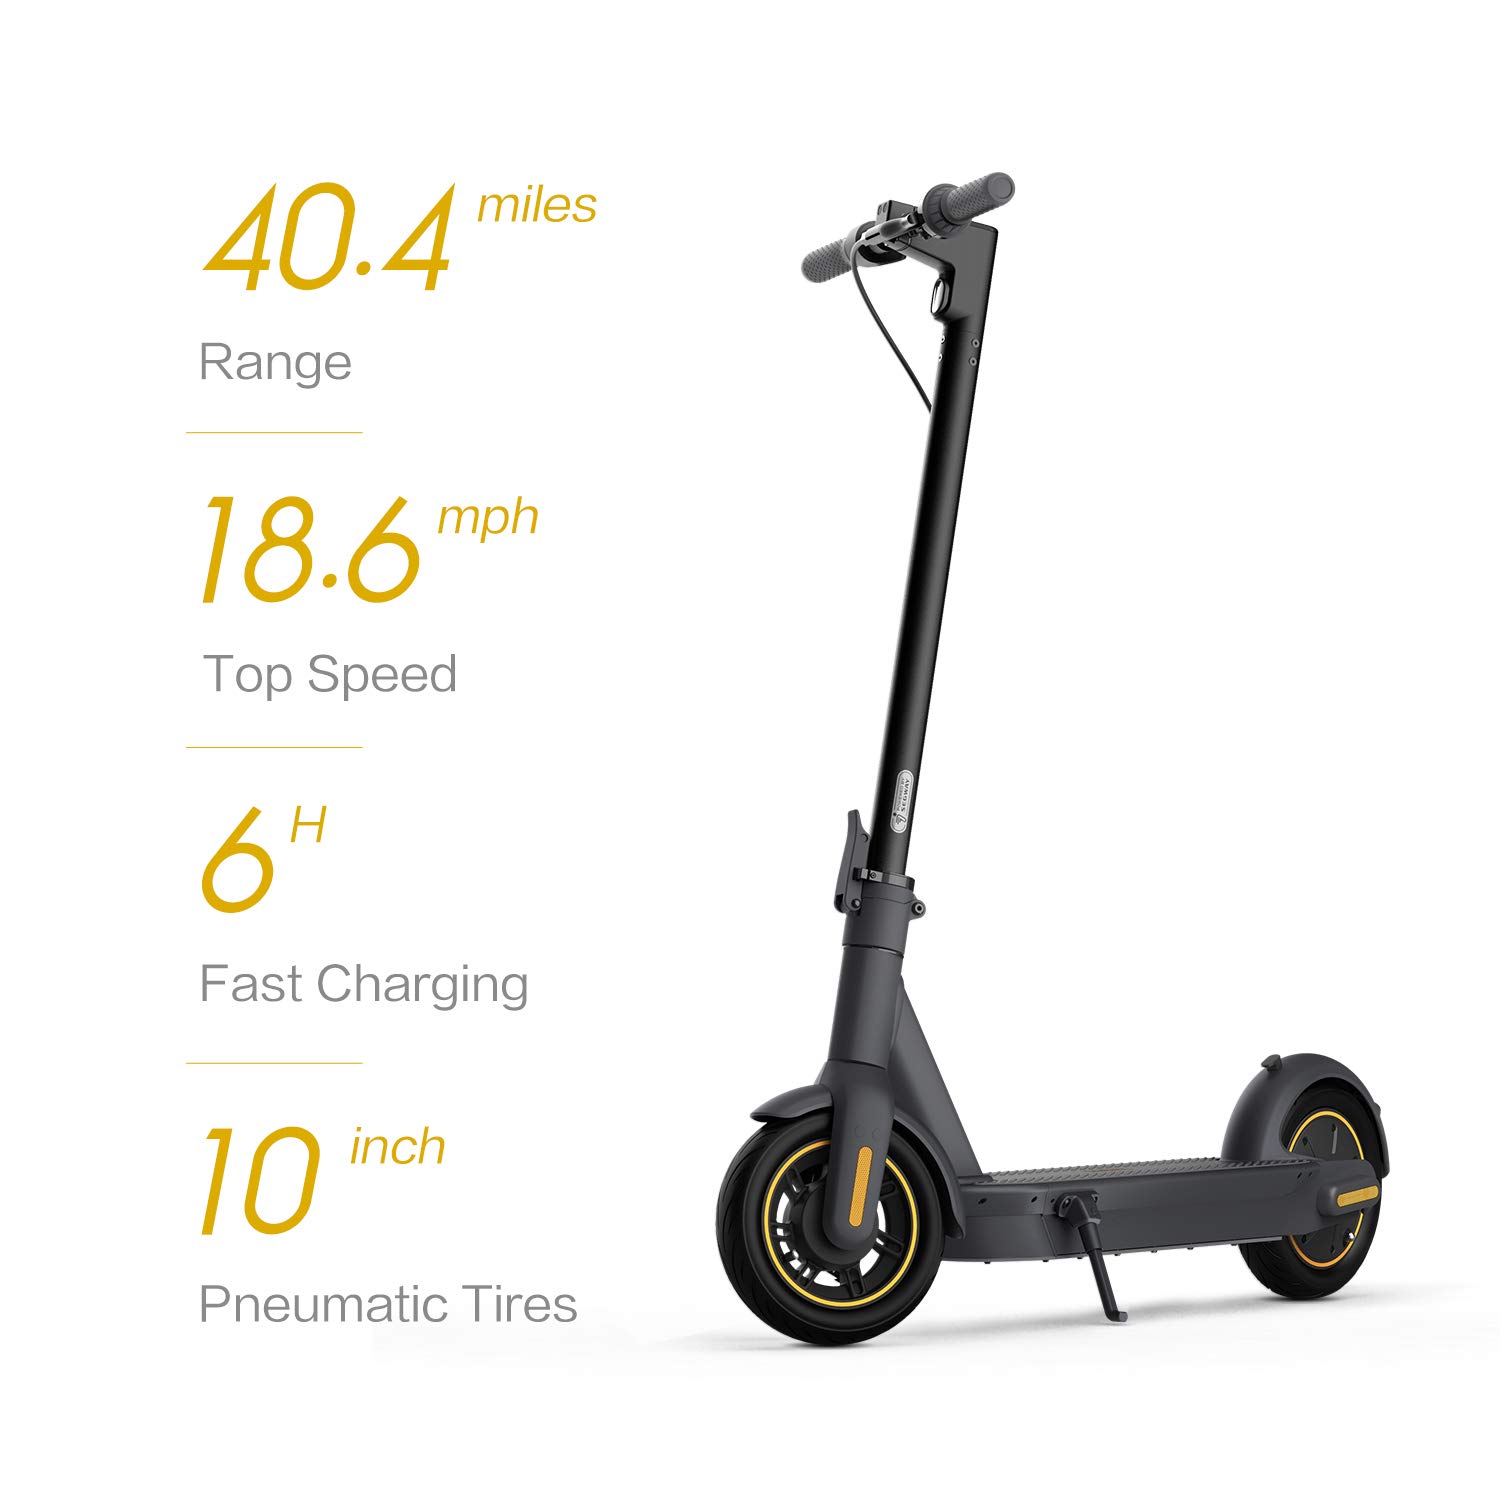 Segway Ninebot MAX Original G30P Electric Scooter $503.99 from Amazon (Only Prime Members)